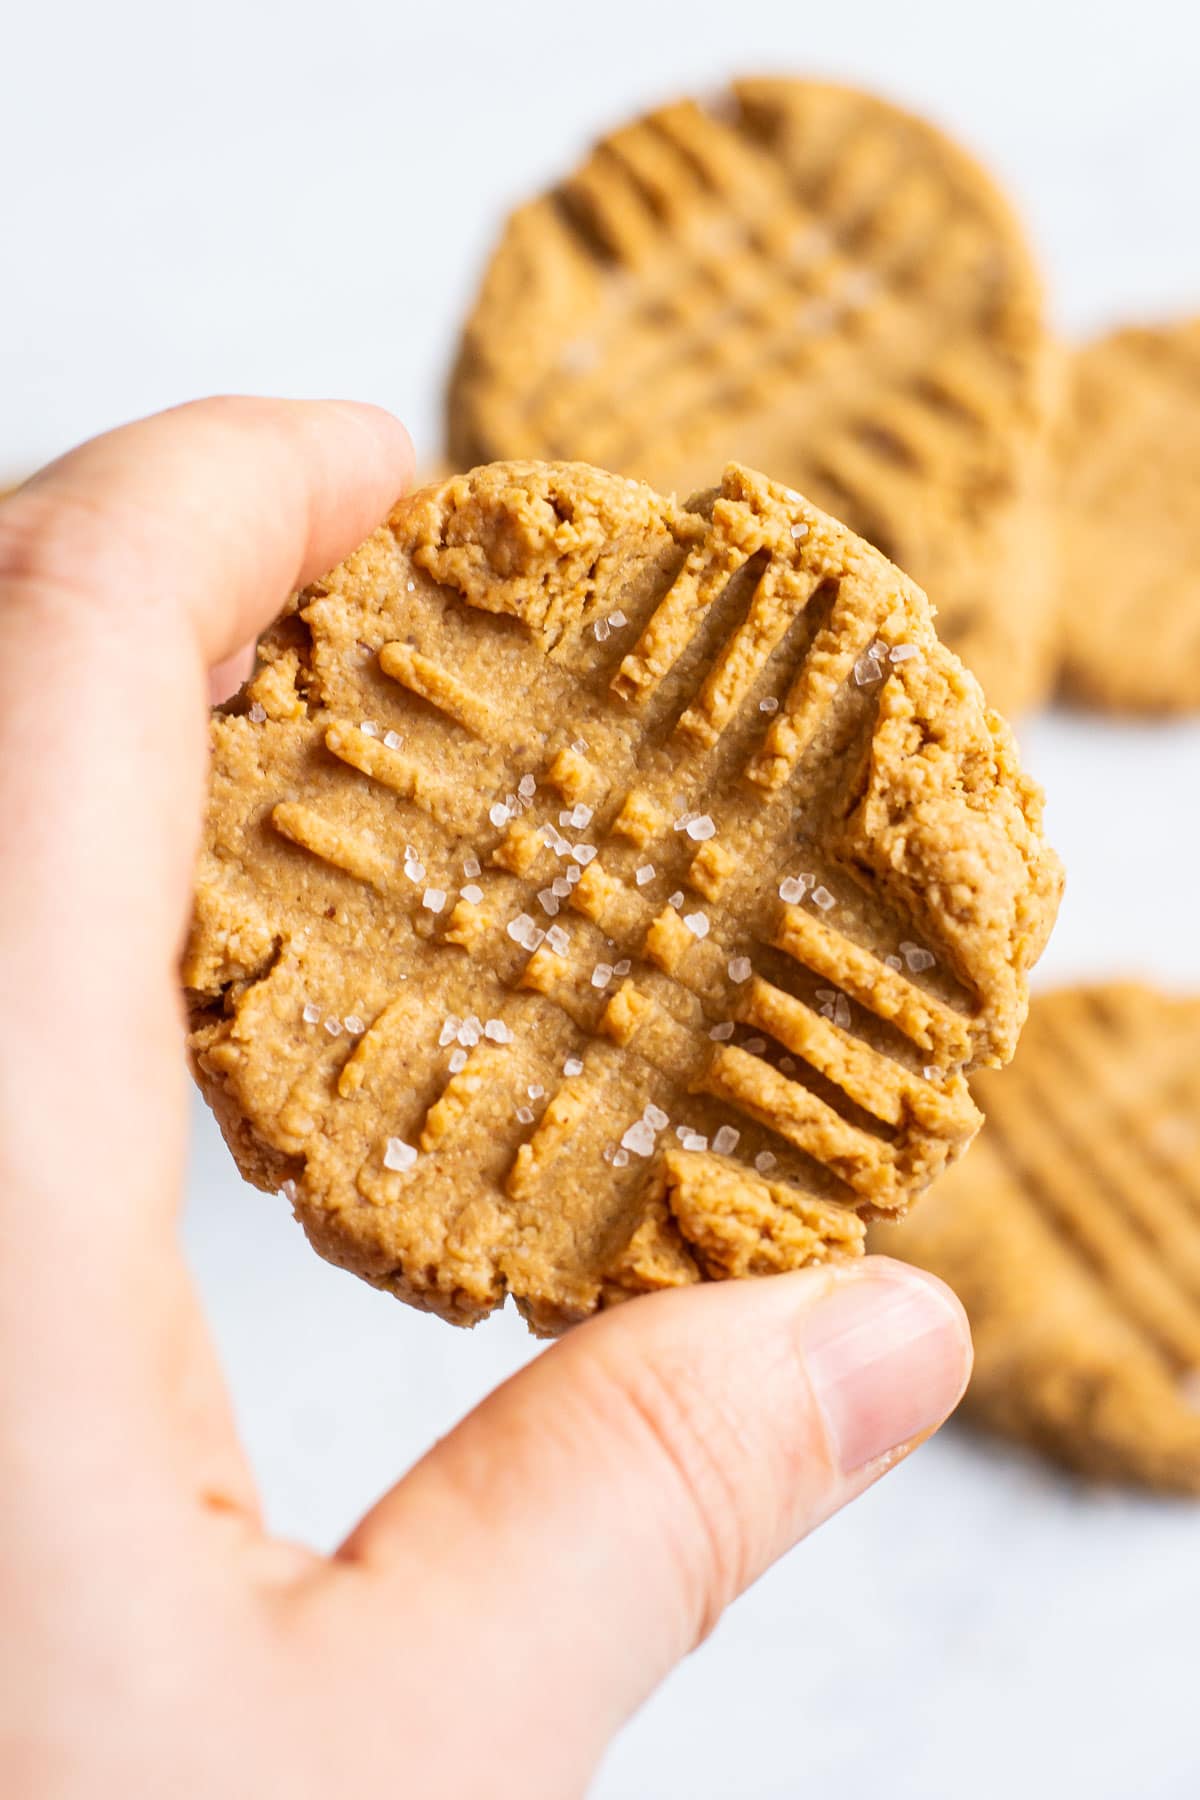 Holding healthy peanut butter cookie sprinkled with sea salt in hand.